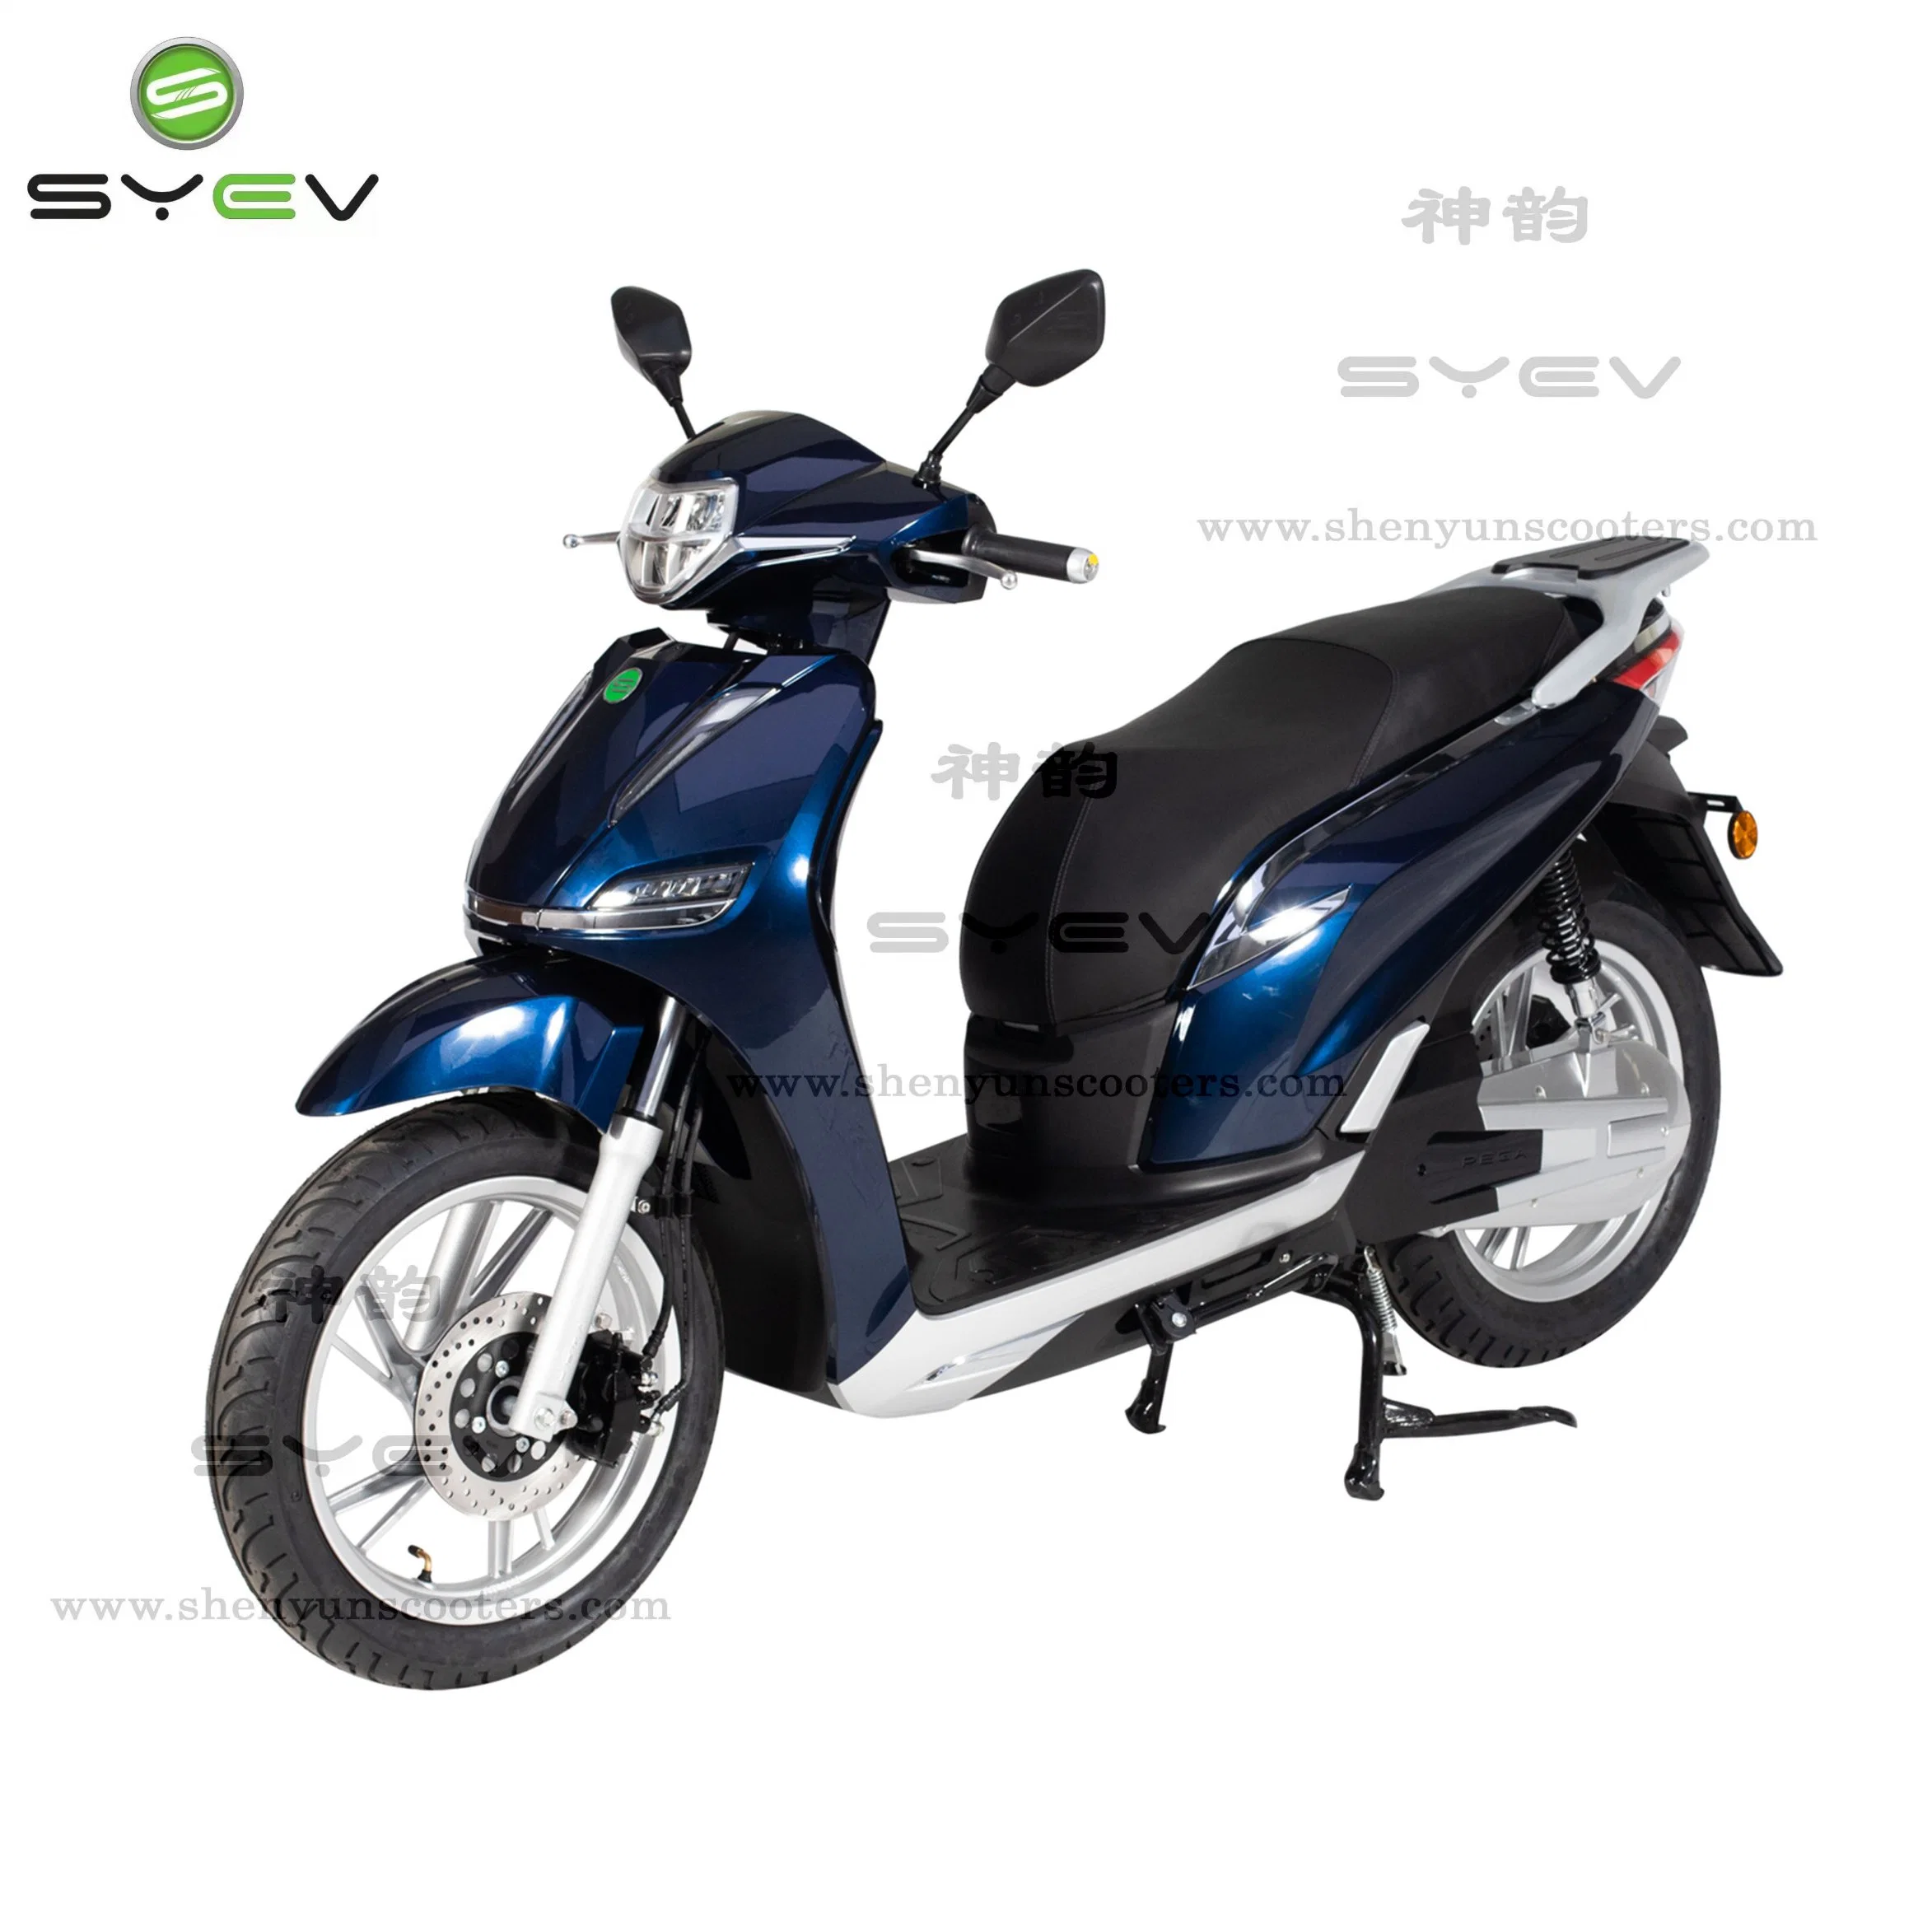 Shenyun 72V45ah 1500W Power 2 Wheel Electric Motorcycle for Adult with EEC